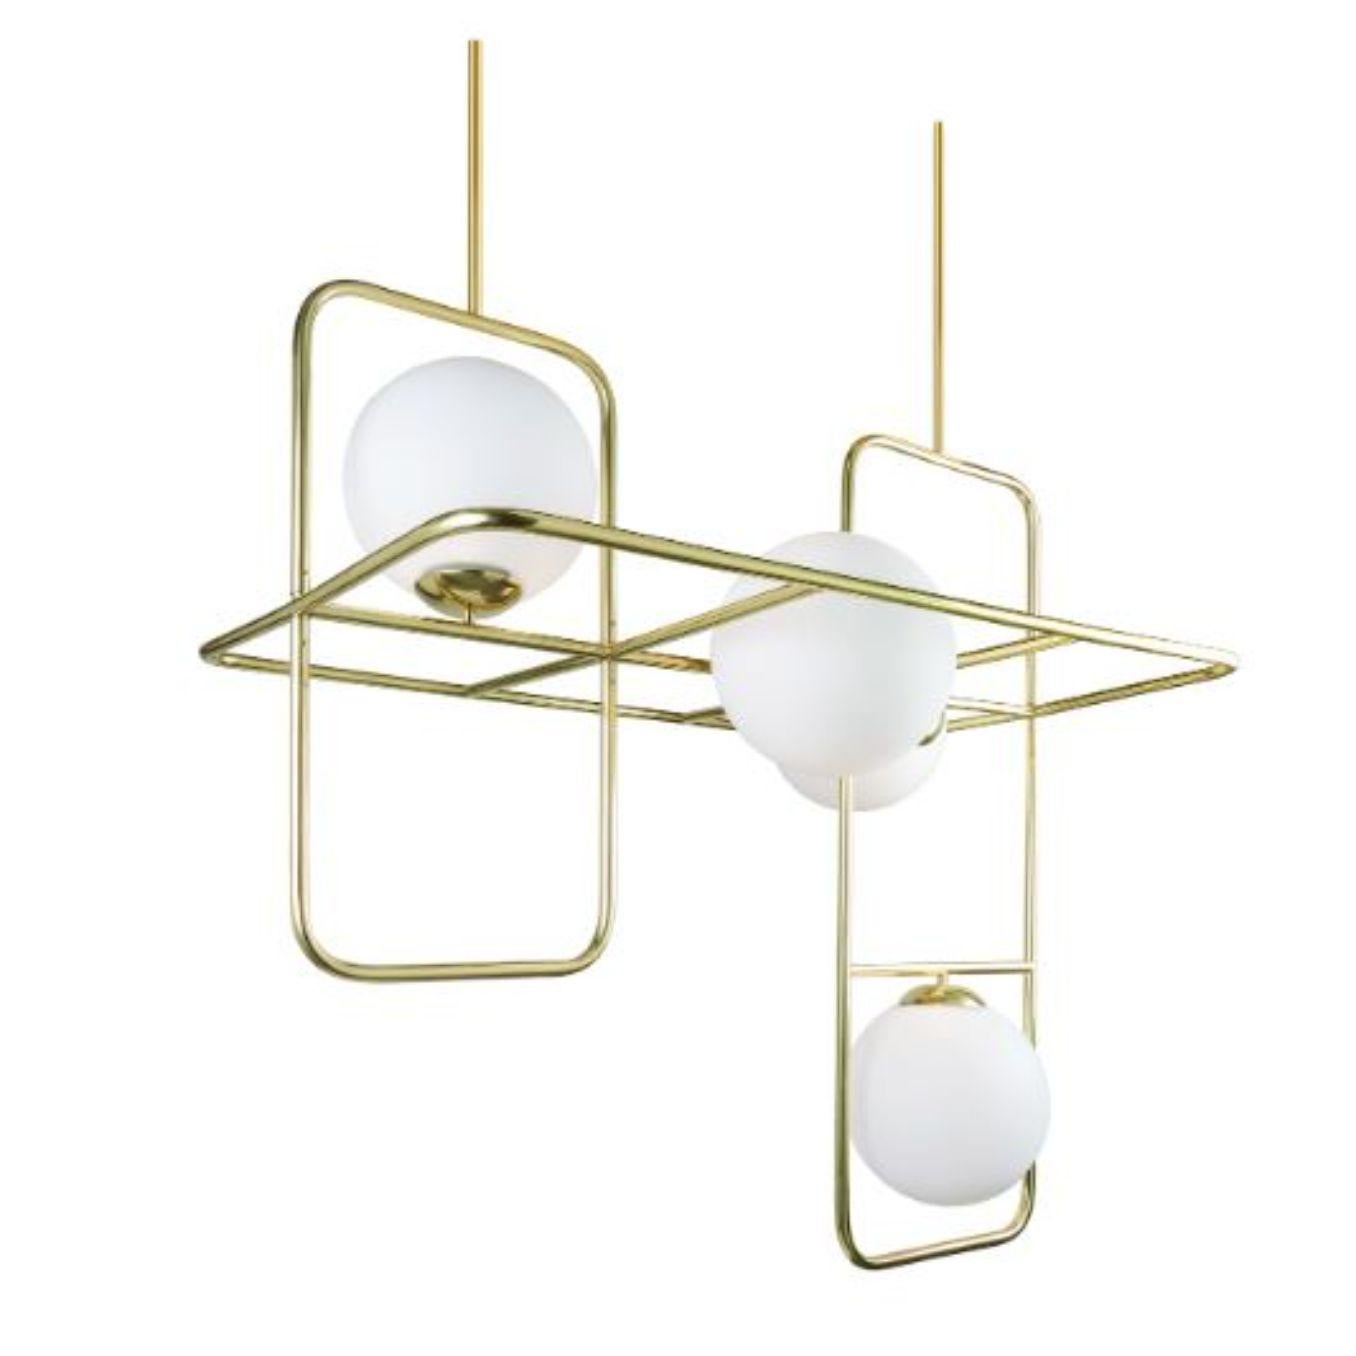 Brass link suspension lamp by Dooq
Dimensions: W 100 x D 64 x H 100 cm
Materials: lacquered metal, polished or brushed metal, brass.
Also available in different colours and materials.

Information:
230V/50Hz
4 x max. G9
5W LED

120V/60Hz
4 x max.